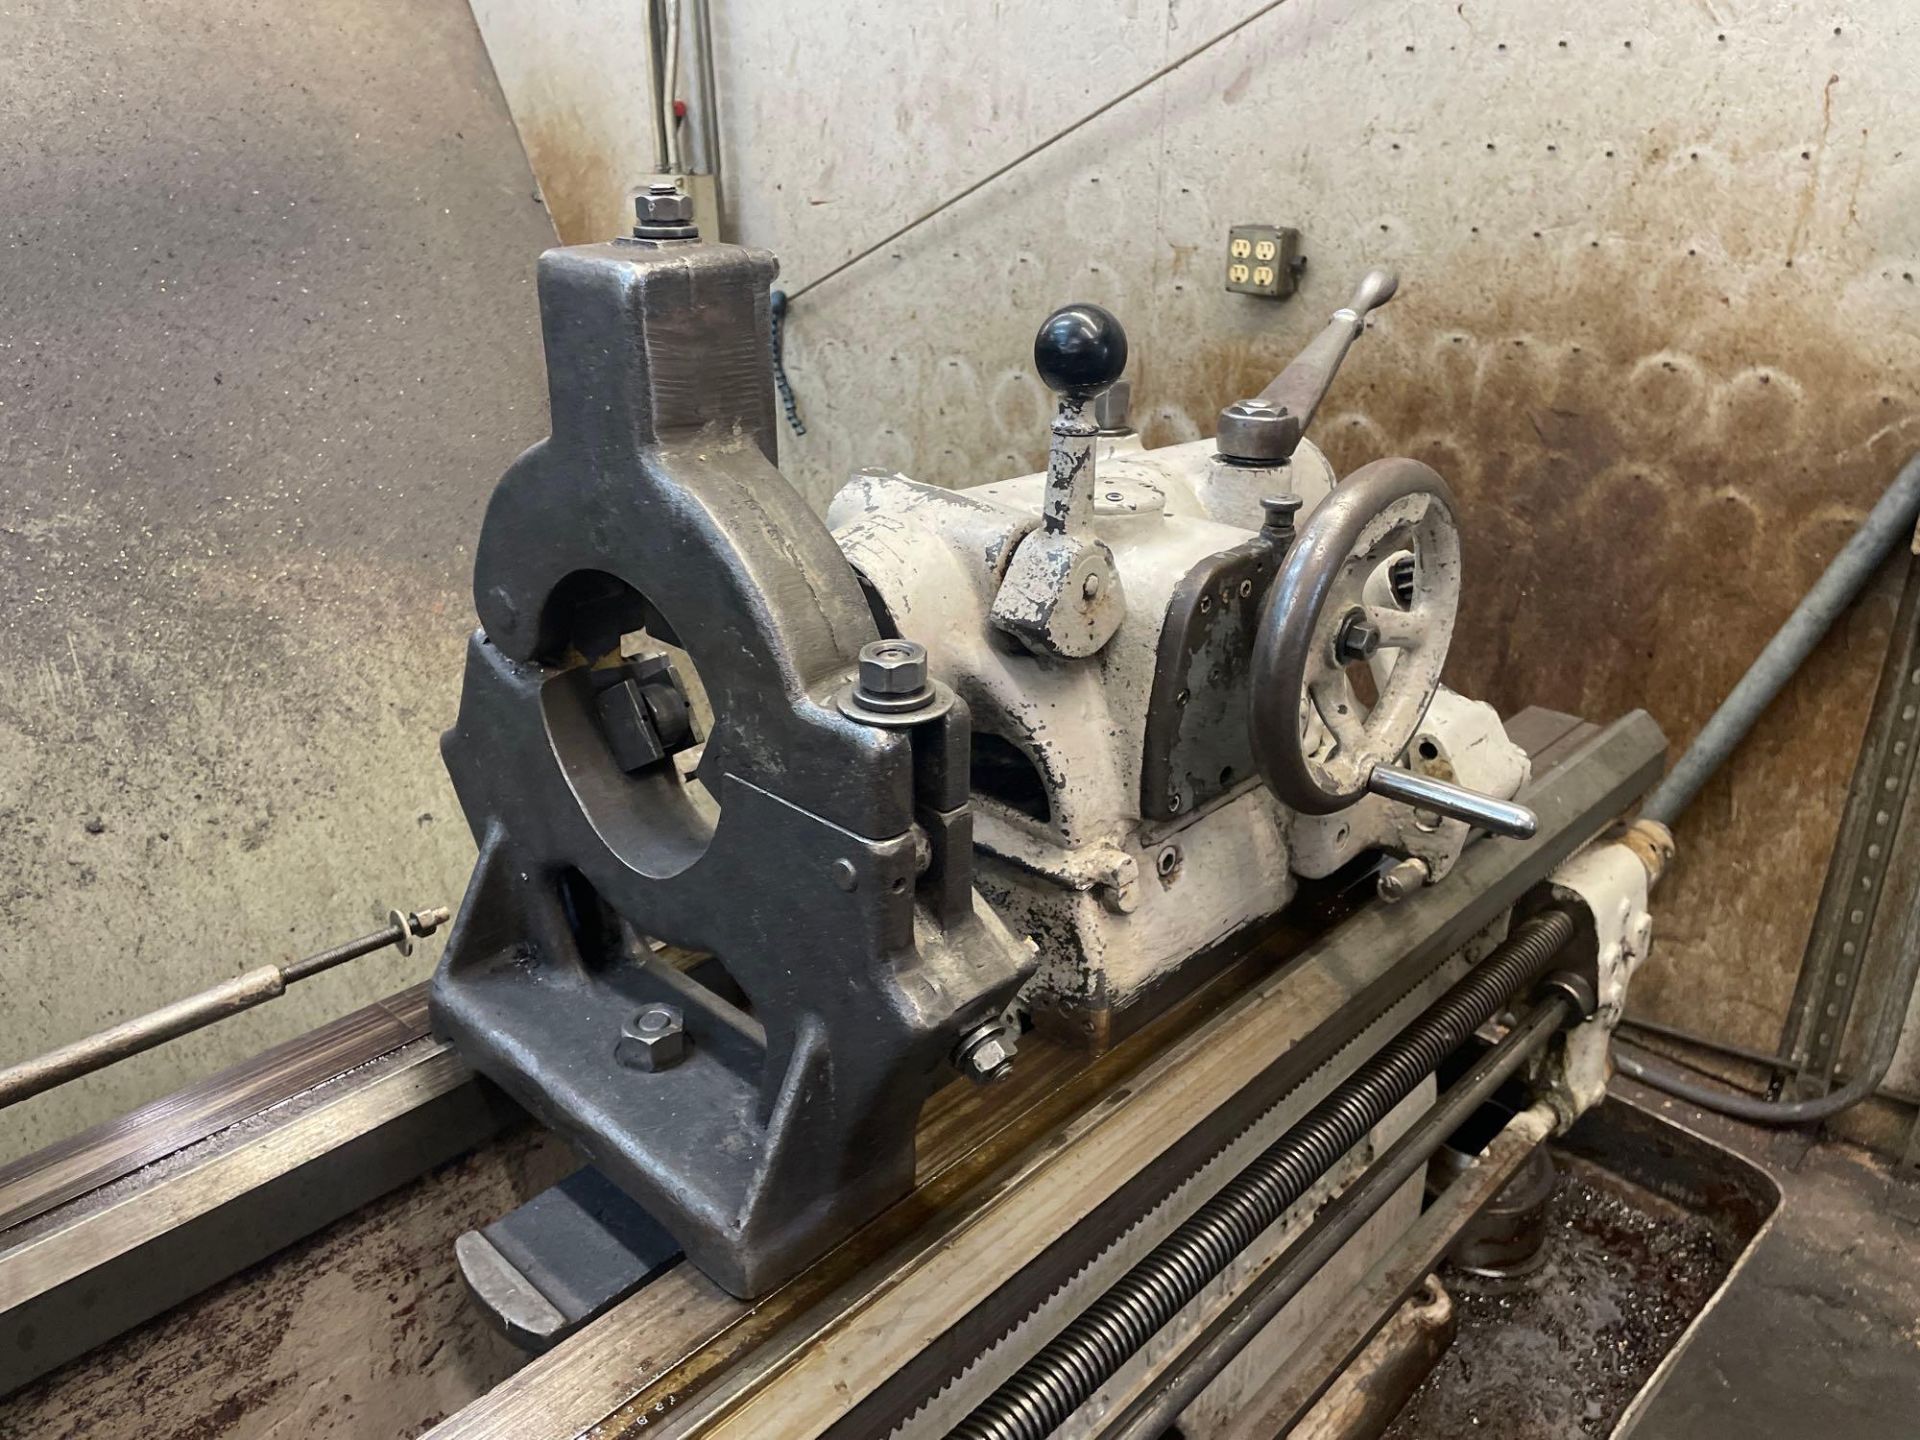 Axelson 16 Lathe, S/N 2639 - Image 10 of 11